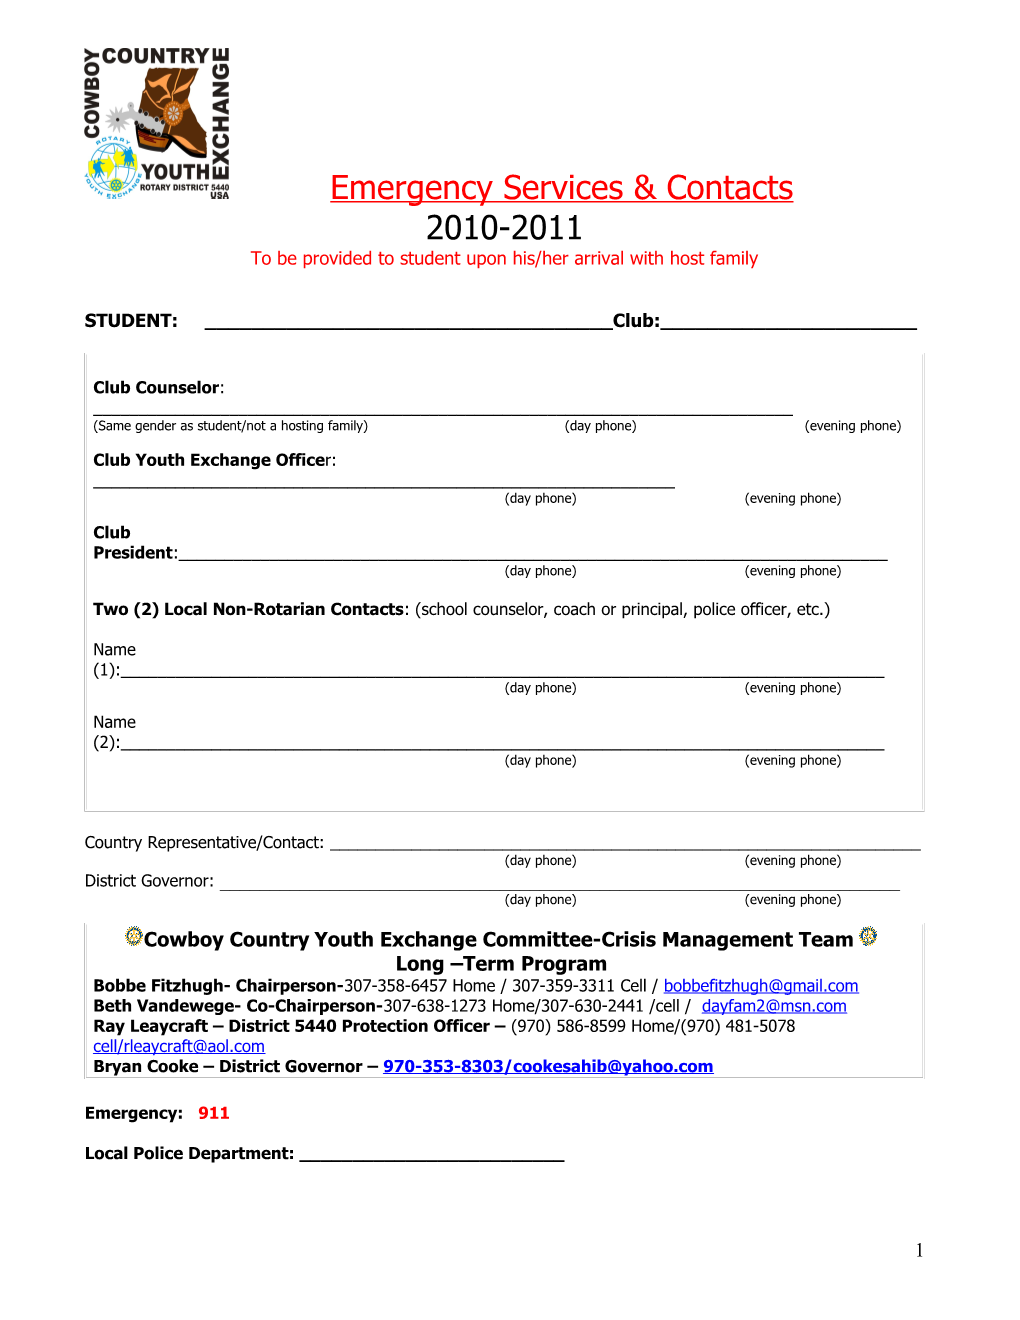 Emergency Services & Contacts s1